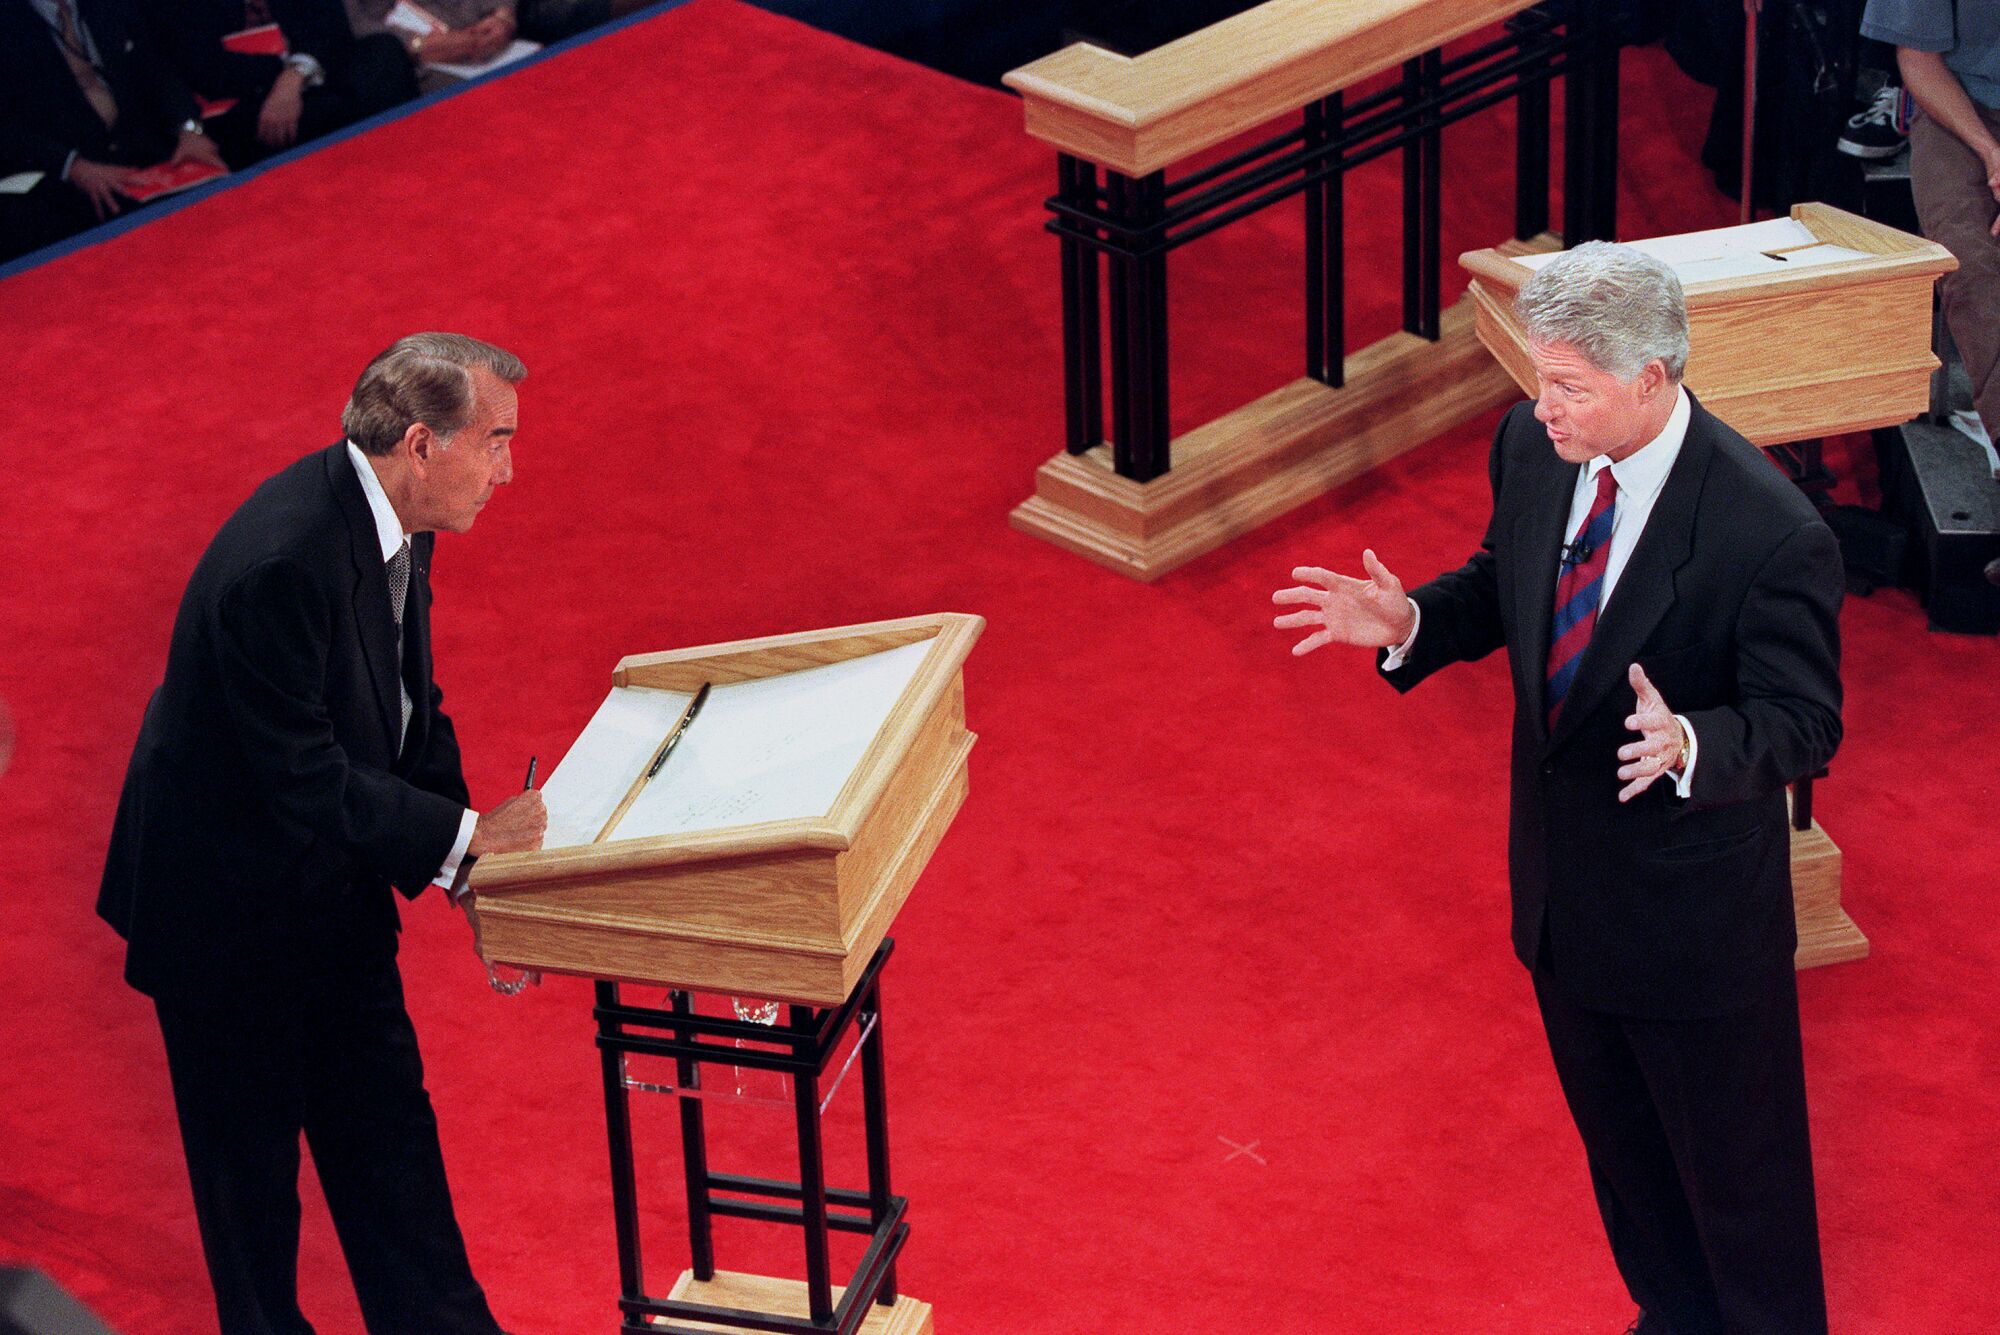 Bill Clinton, right, and Bob Dole, left, stand on a red podium facing each other during a 1996 presidential debate